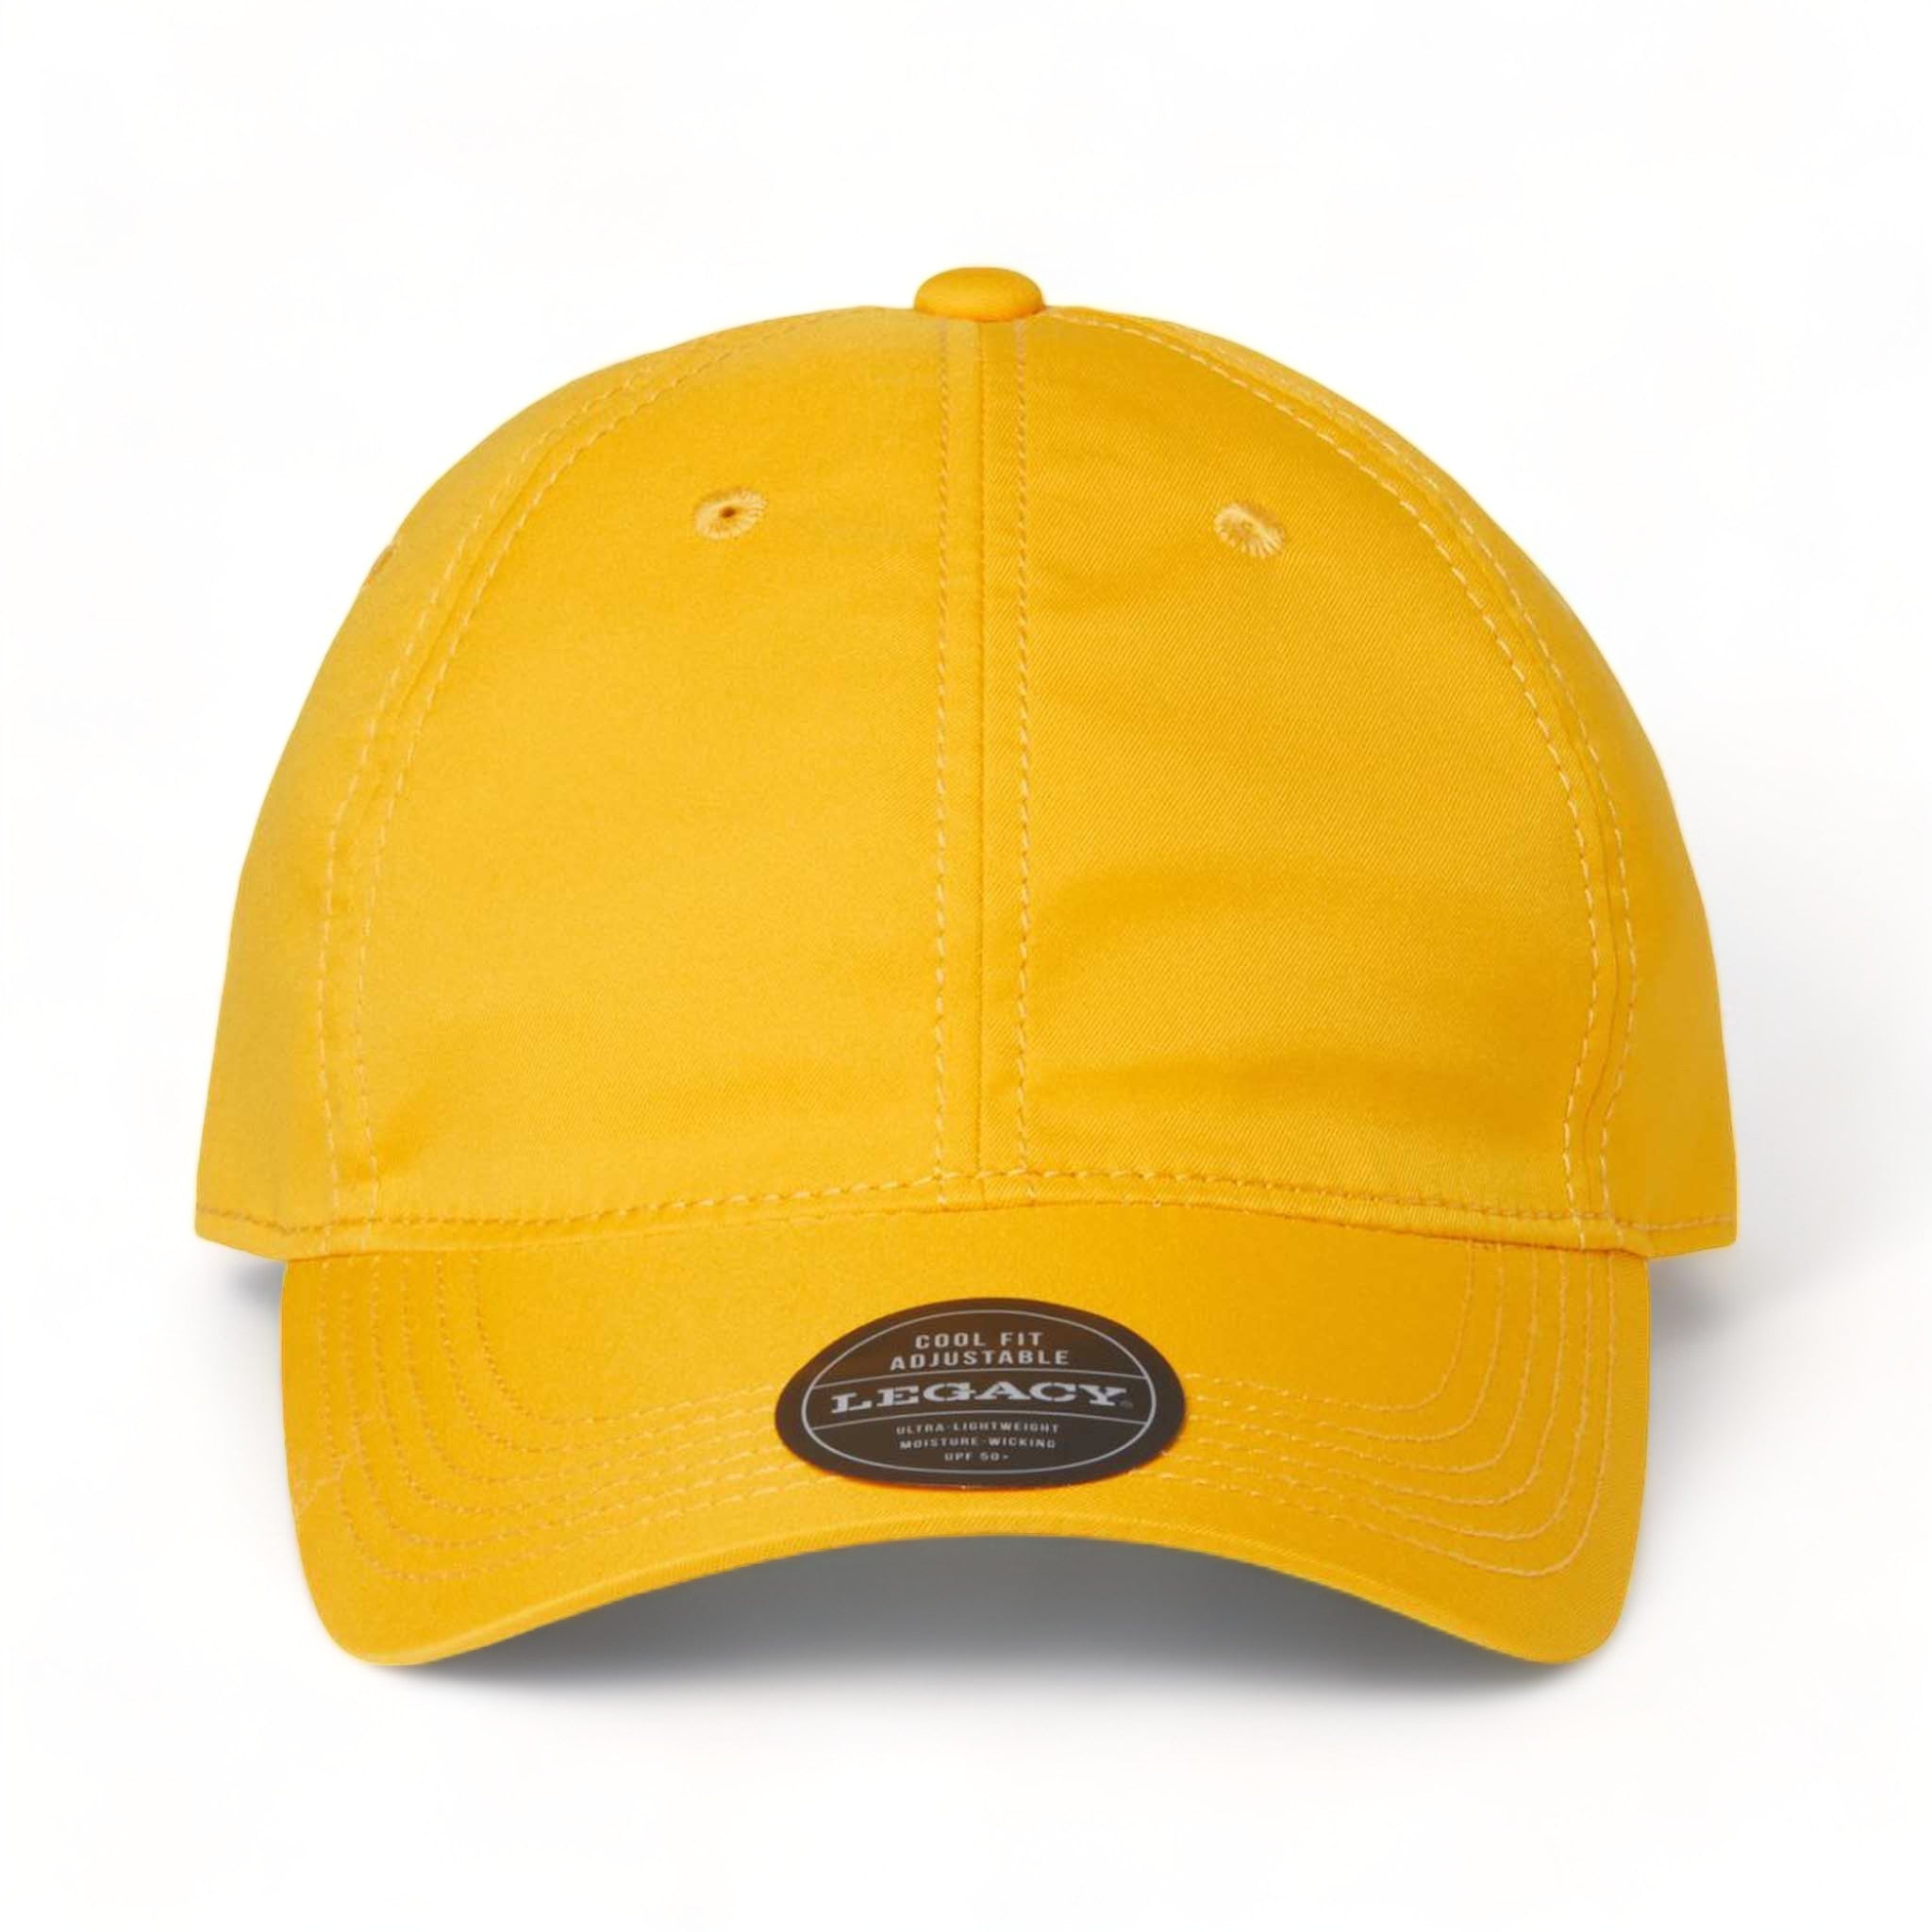 Front view of LEGACY CFA custom hat in gold